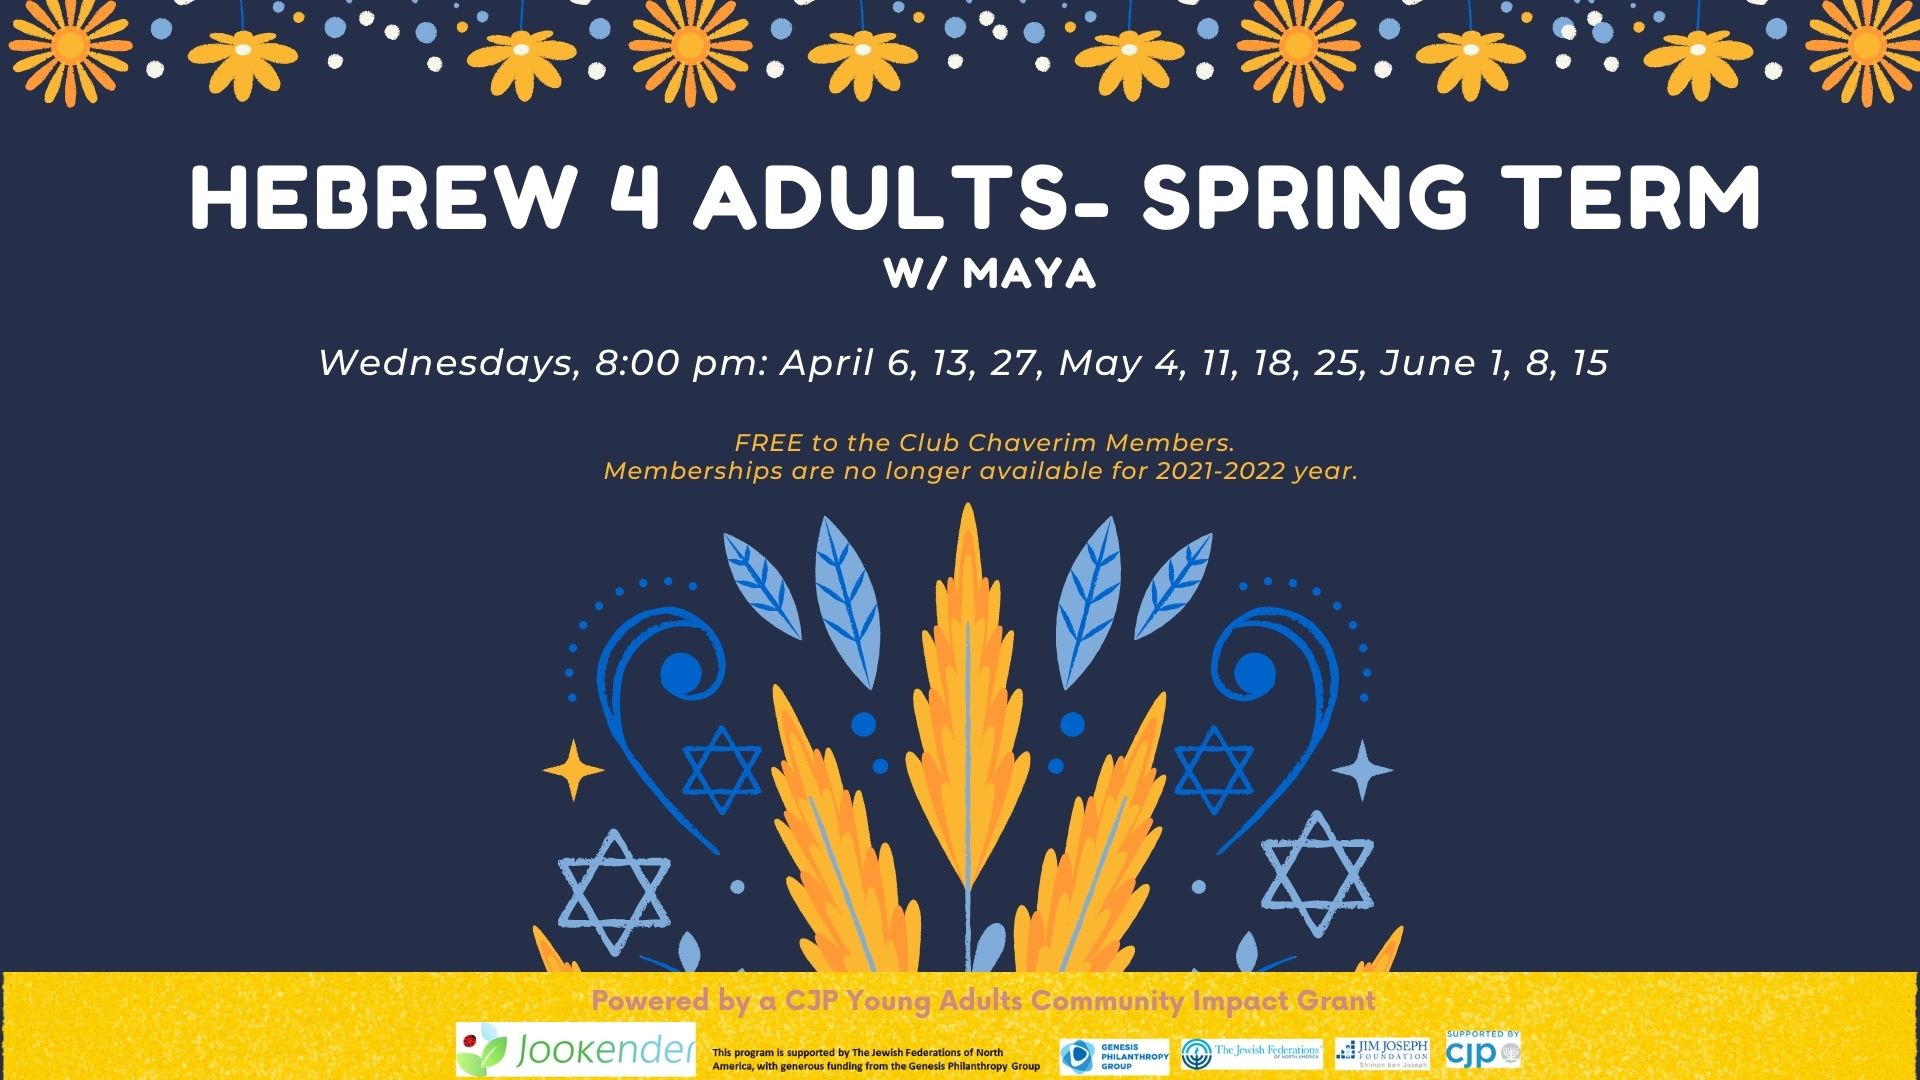 Hebrew 4 Adults - Spring Term